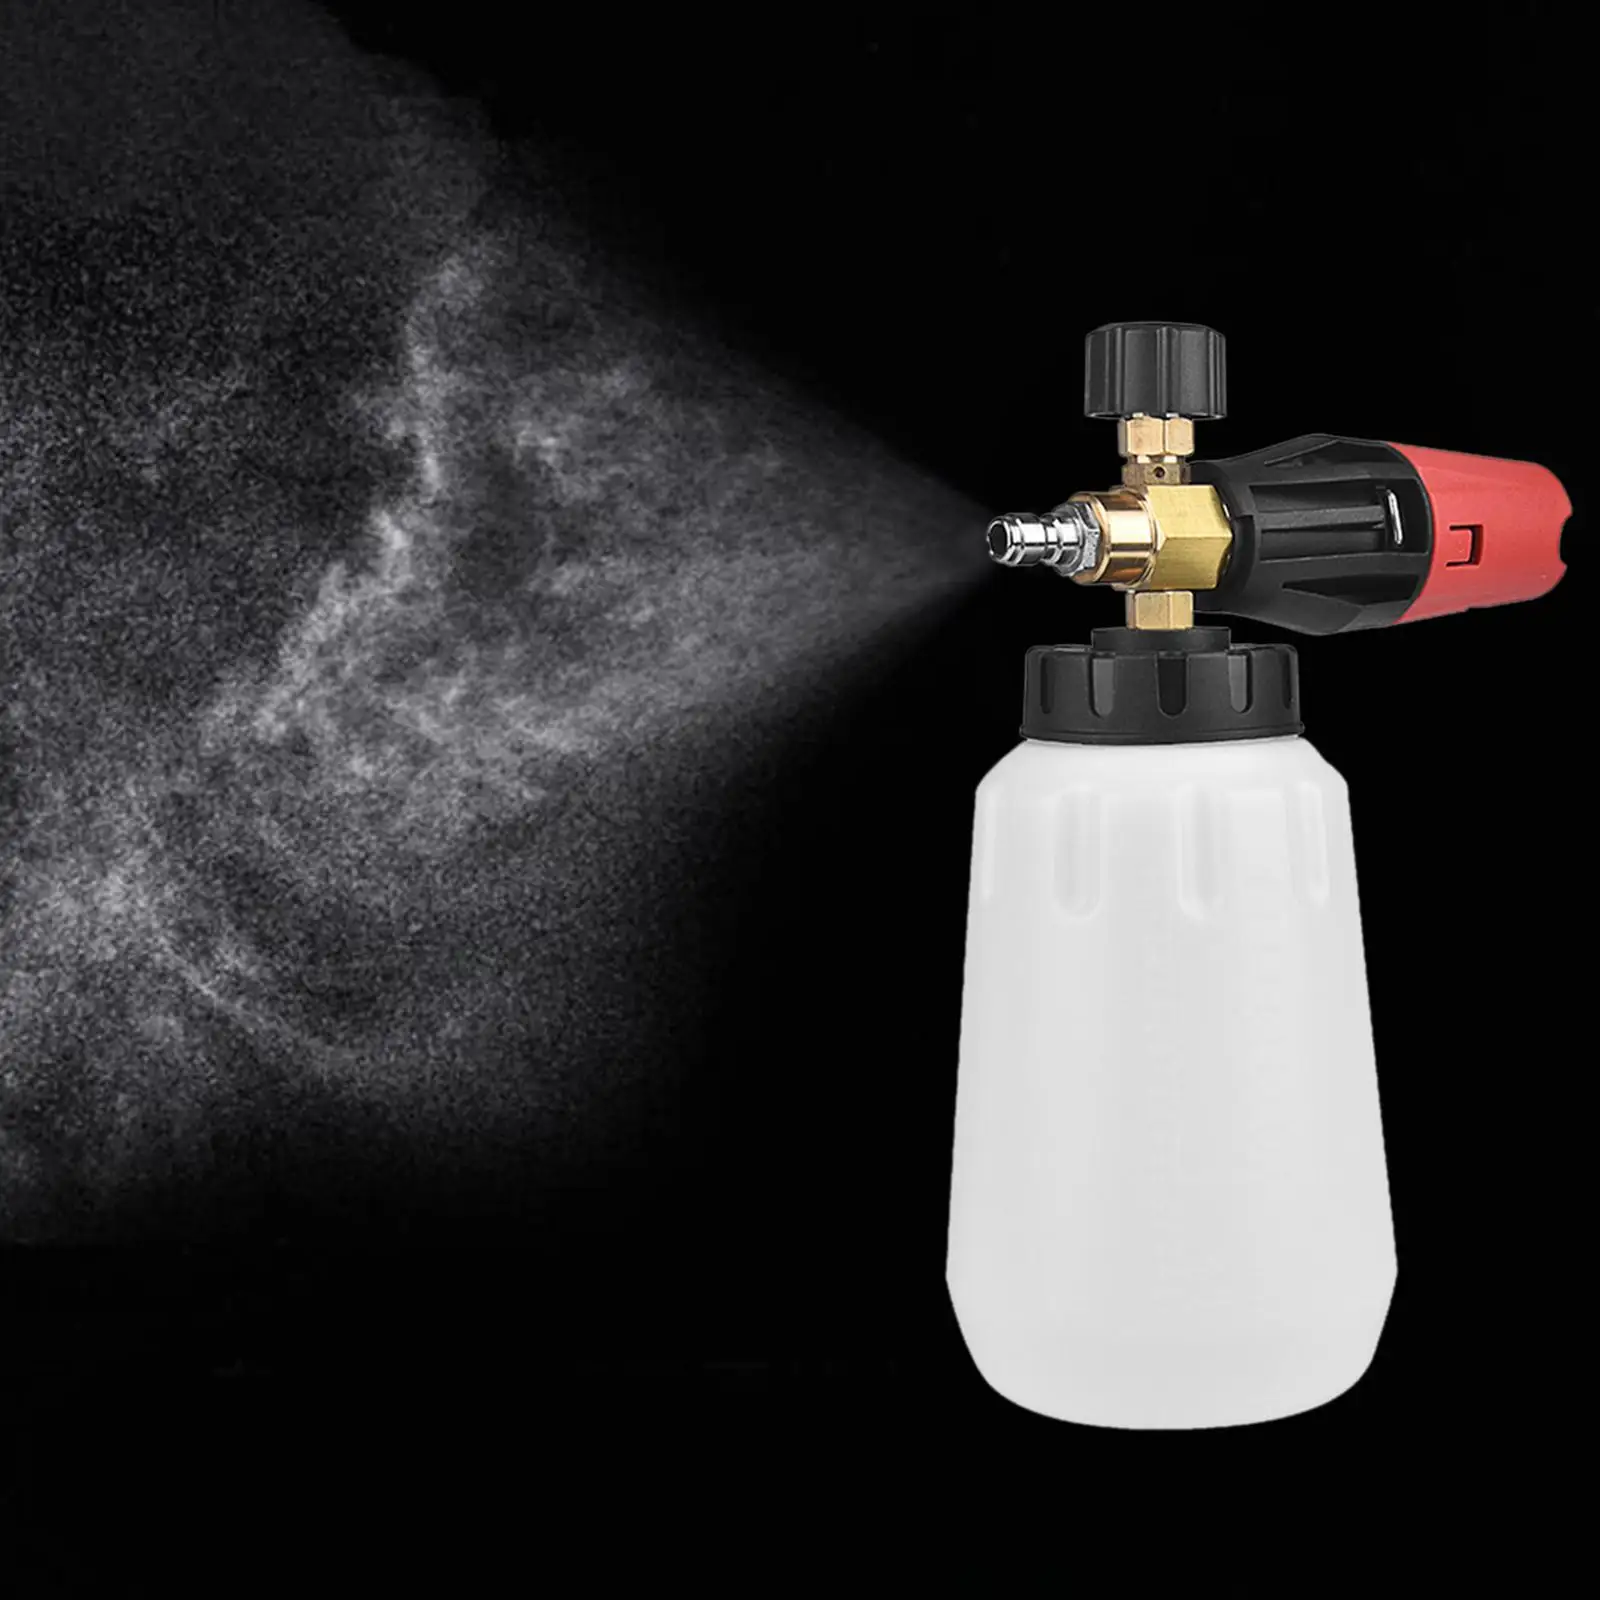 Professional Foaming Sprayer Quick Release 1/4